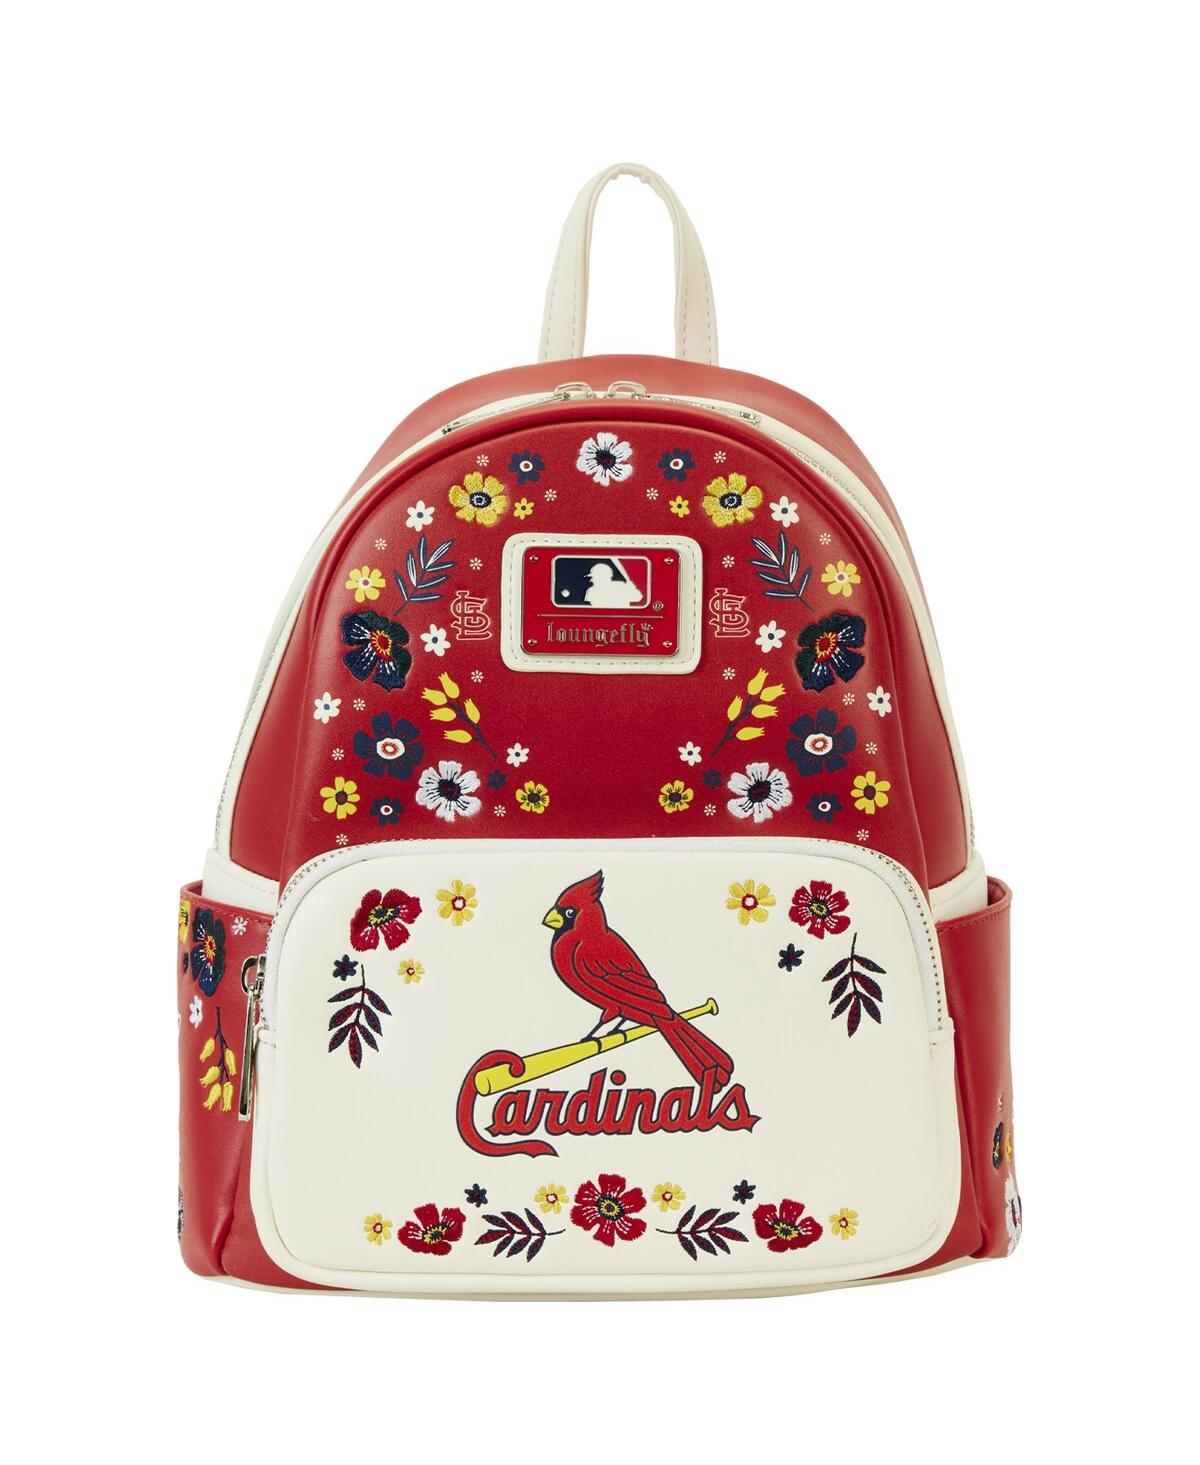 Men's and Women's Loungefly St. Louis Cardinals Floral Mini Backpack - Multi